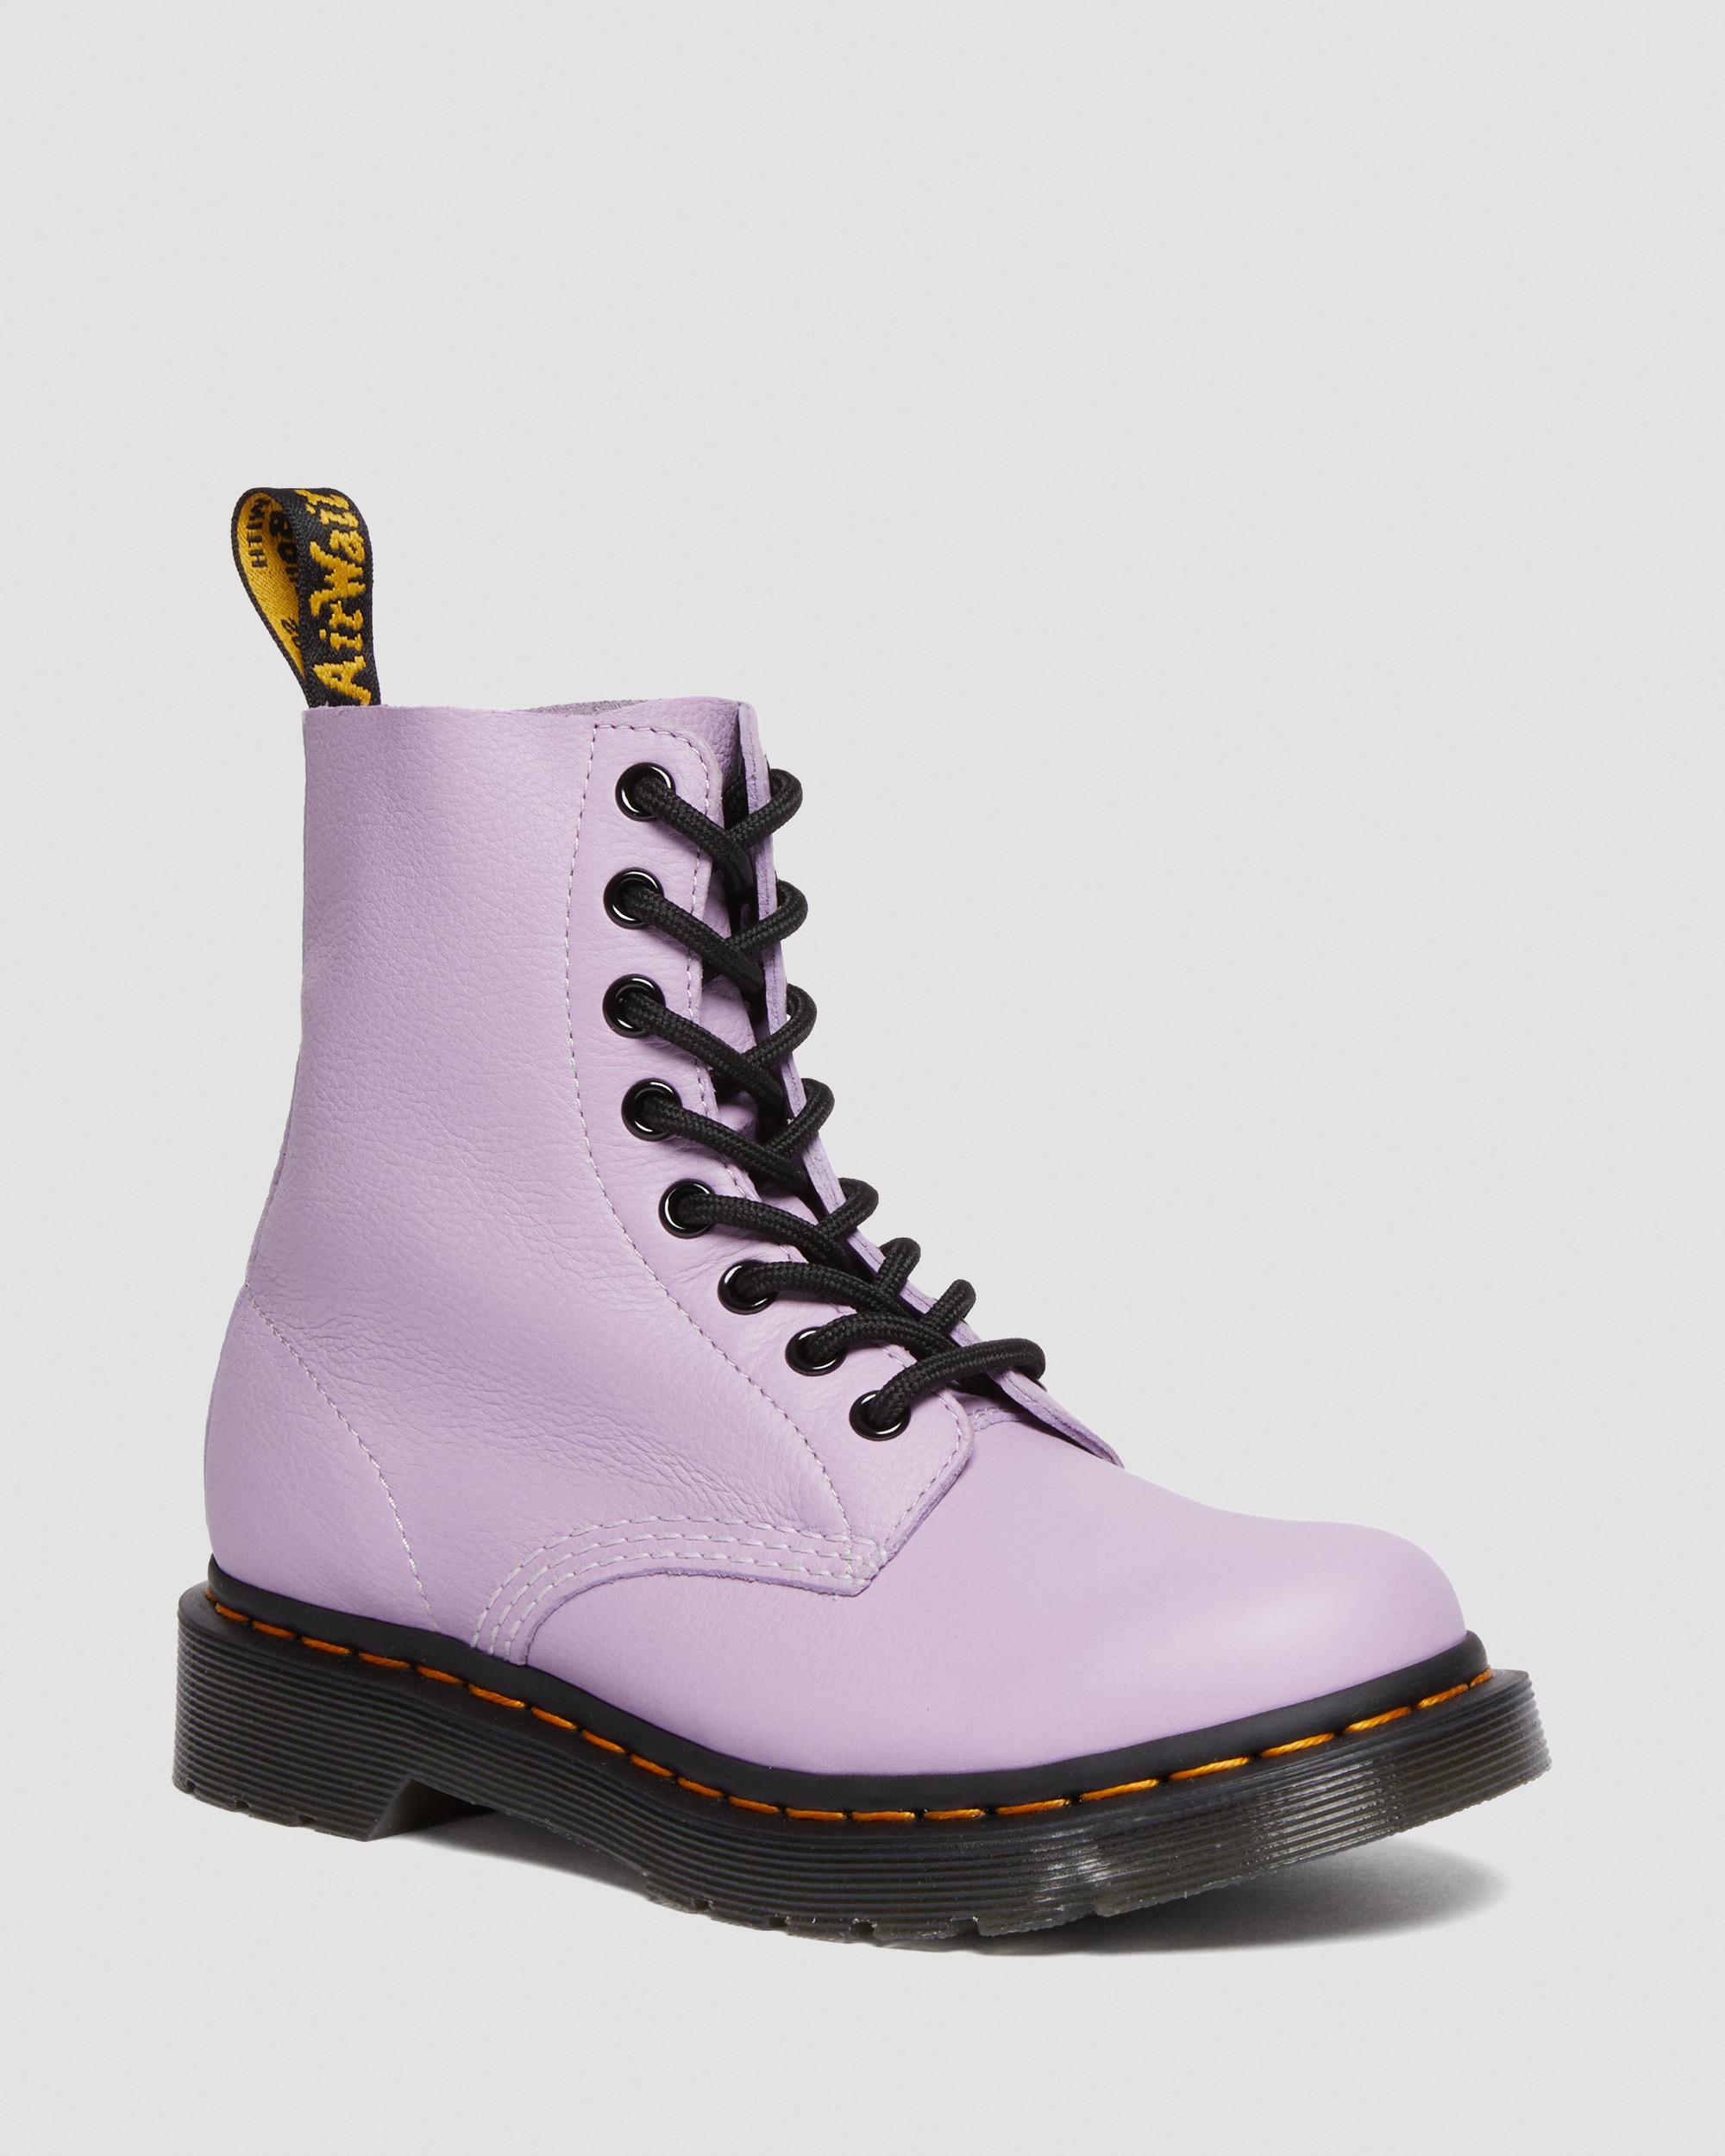 1460 Women\'s Pascal Black Eyelet Dr. | Boots Martens in Up Lace Lilac